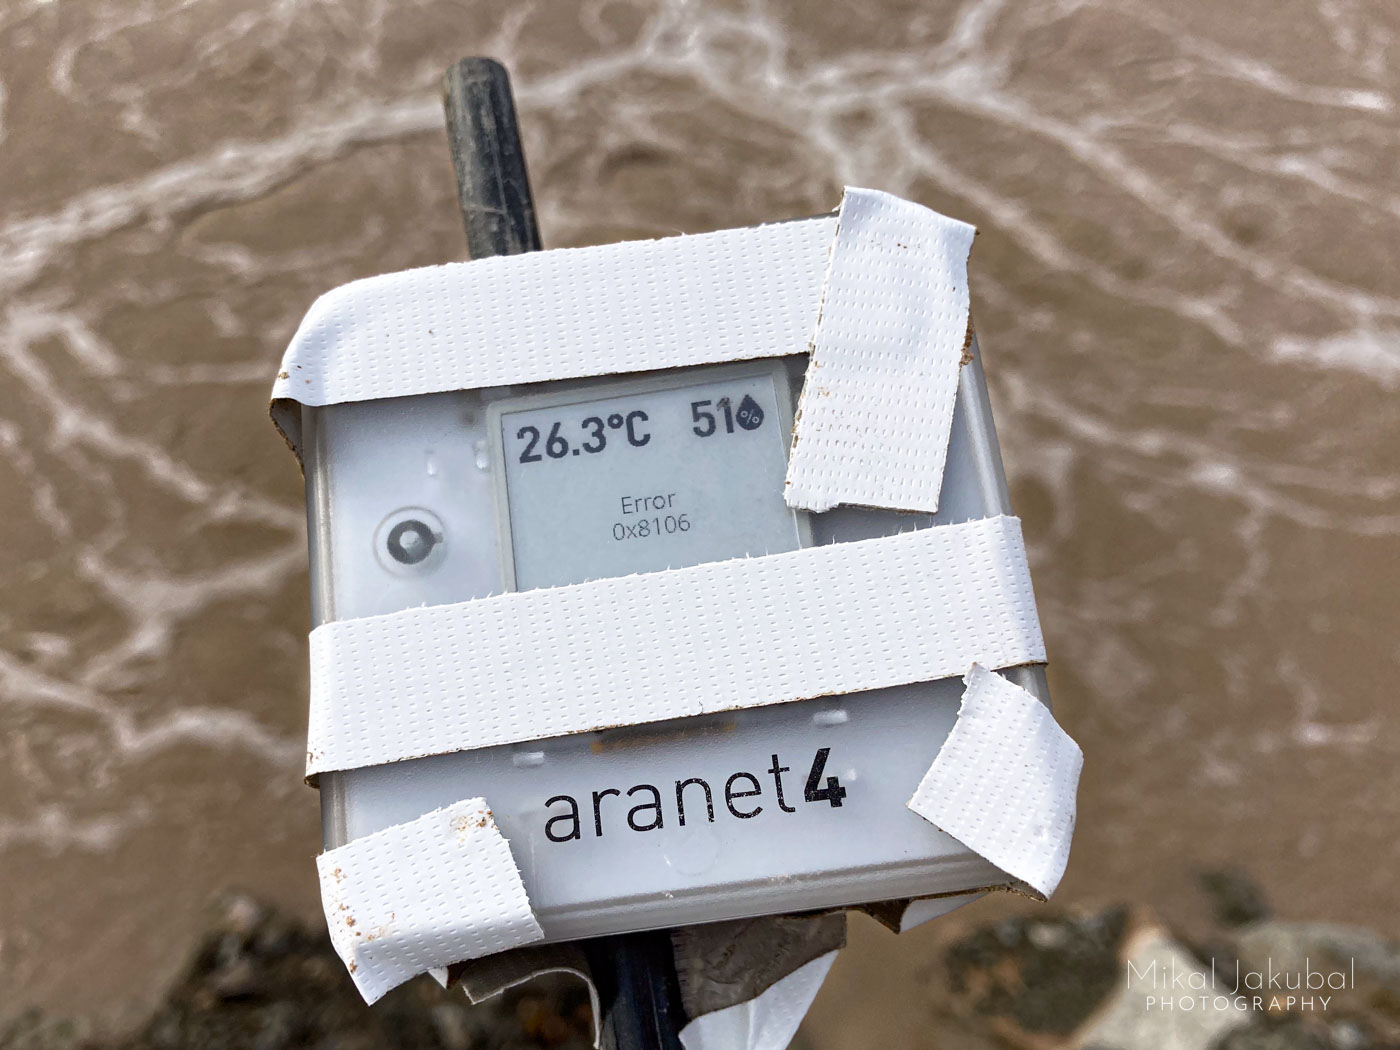 A hand held CO2 meter made of milky white plastic about 3" x 3" showing an "Error" message on the screen. It is taped with strips of white tape to the end of a fiberglass tent pole. Below in the background is the brown bubbling surface of the pool.